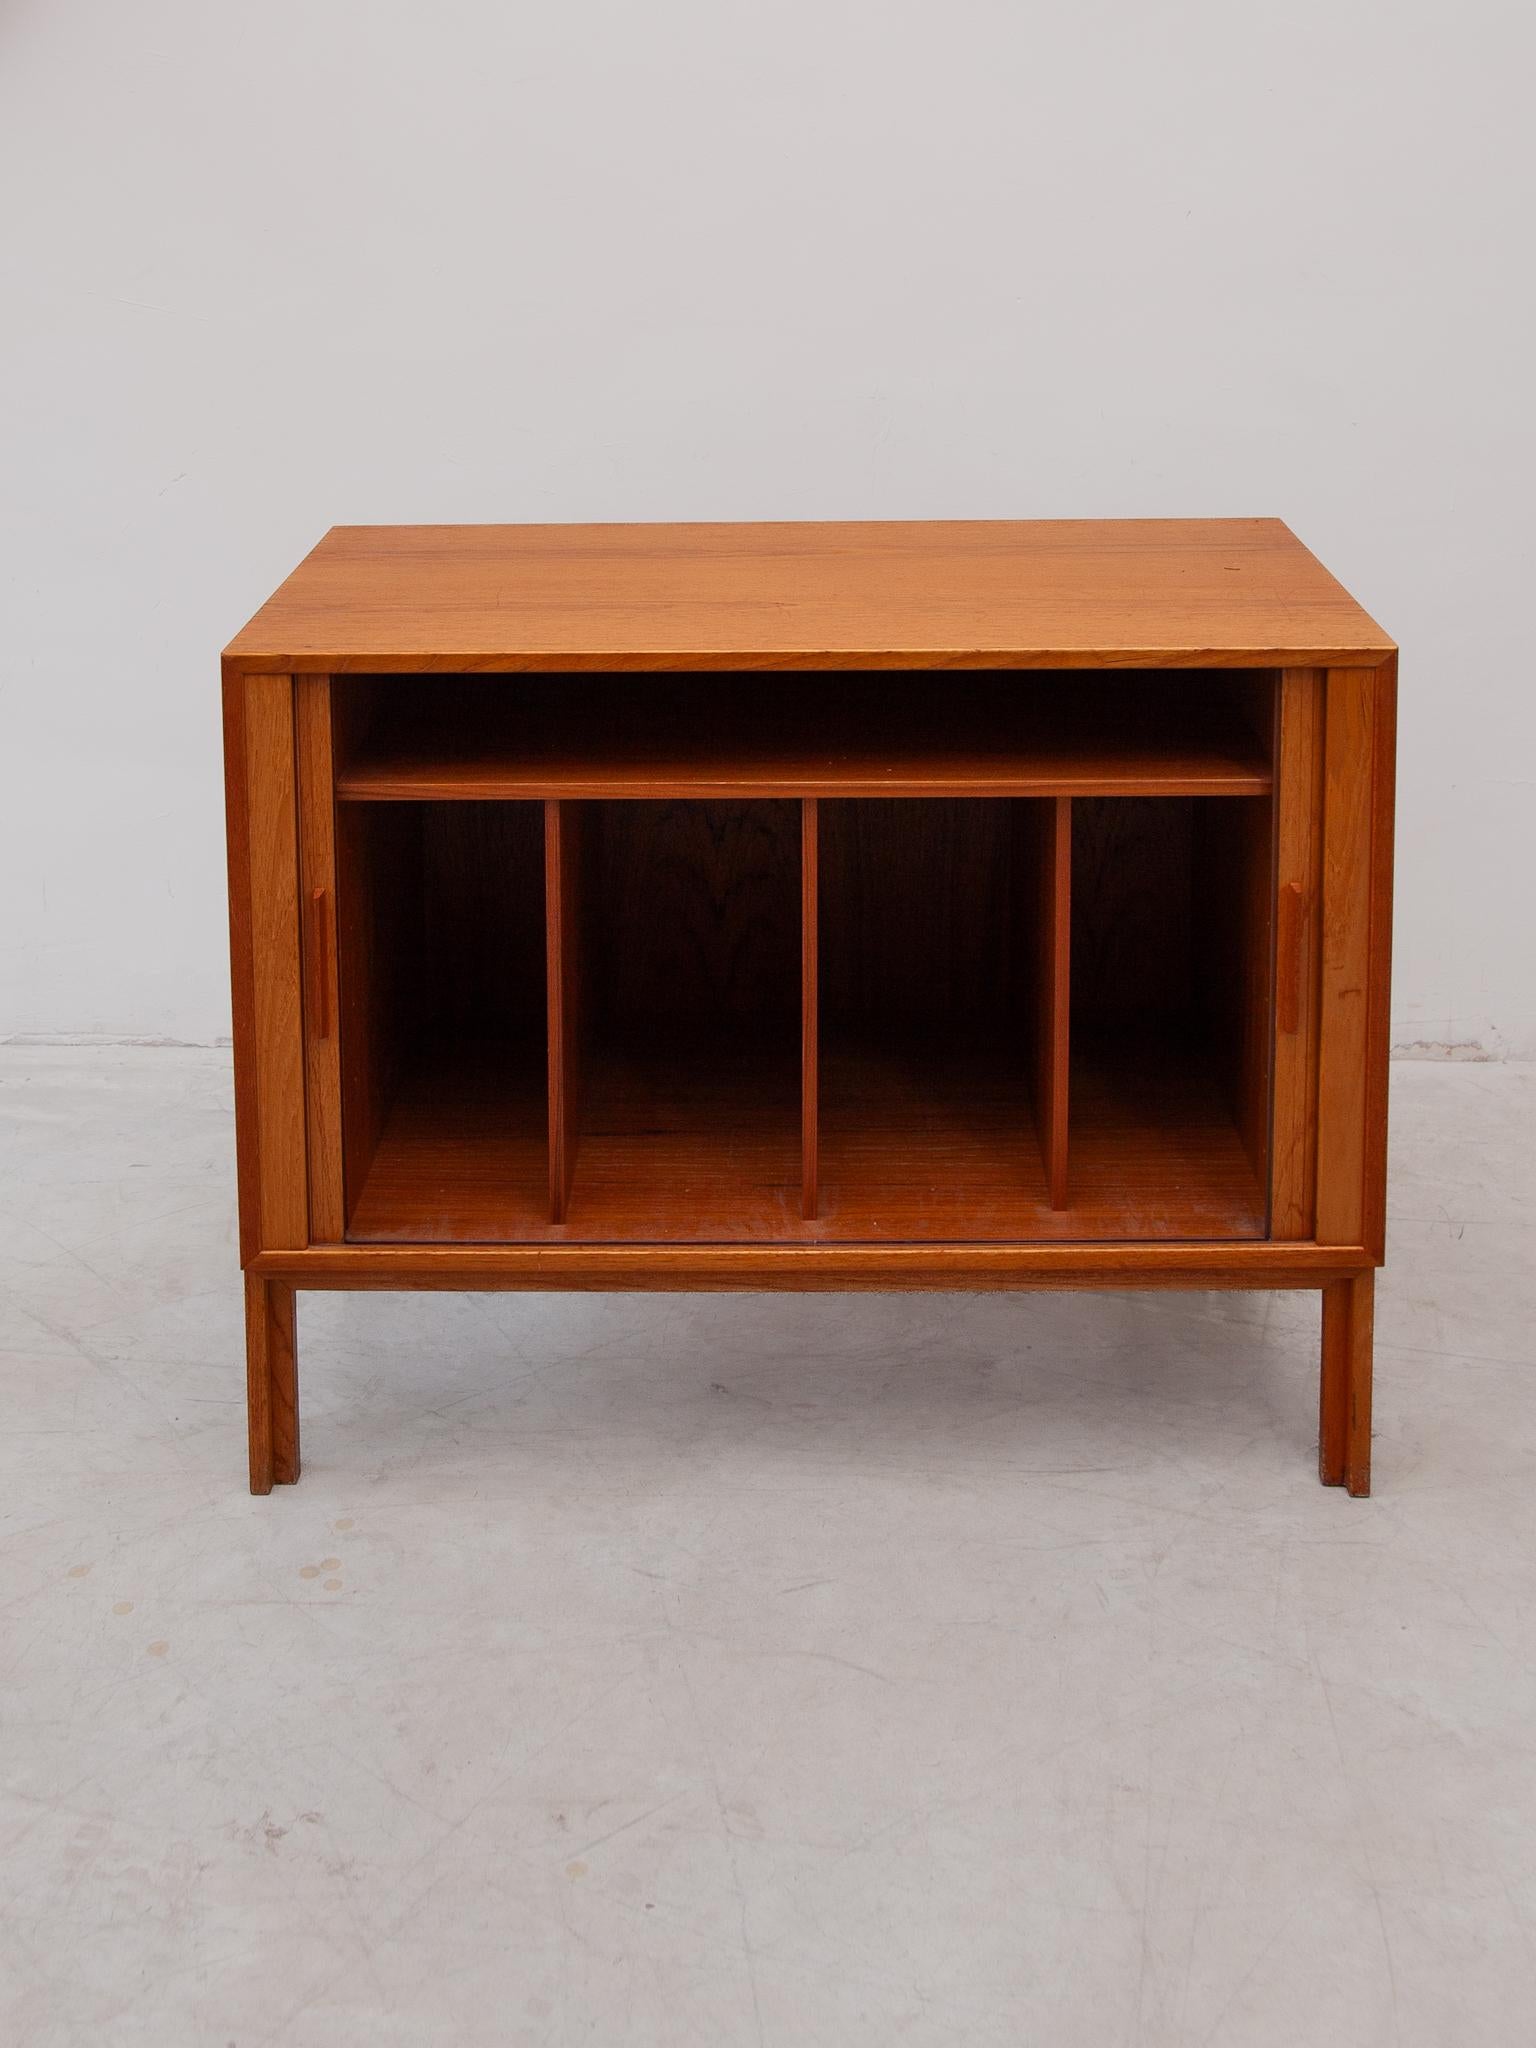 Hand-Crafted Modular Sideboard with Sliding Doors designed by Kai Kristiansen 1970s For Sale